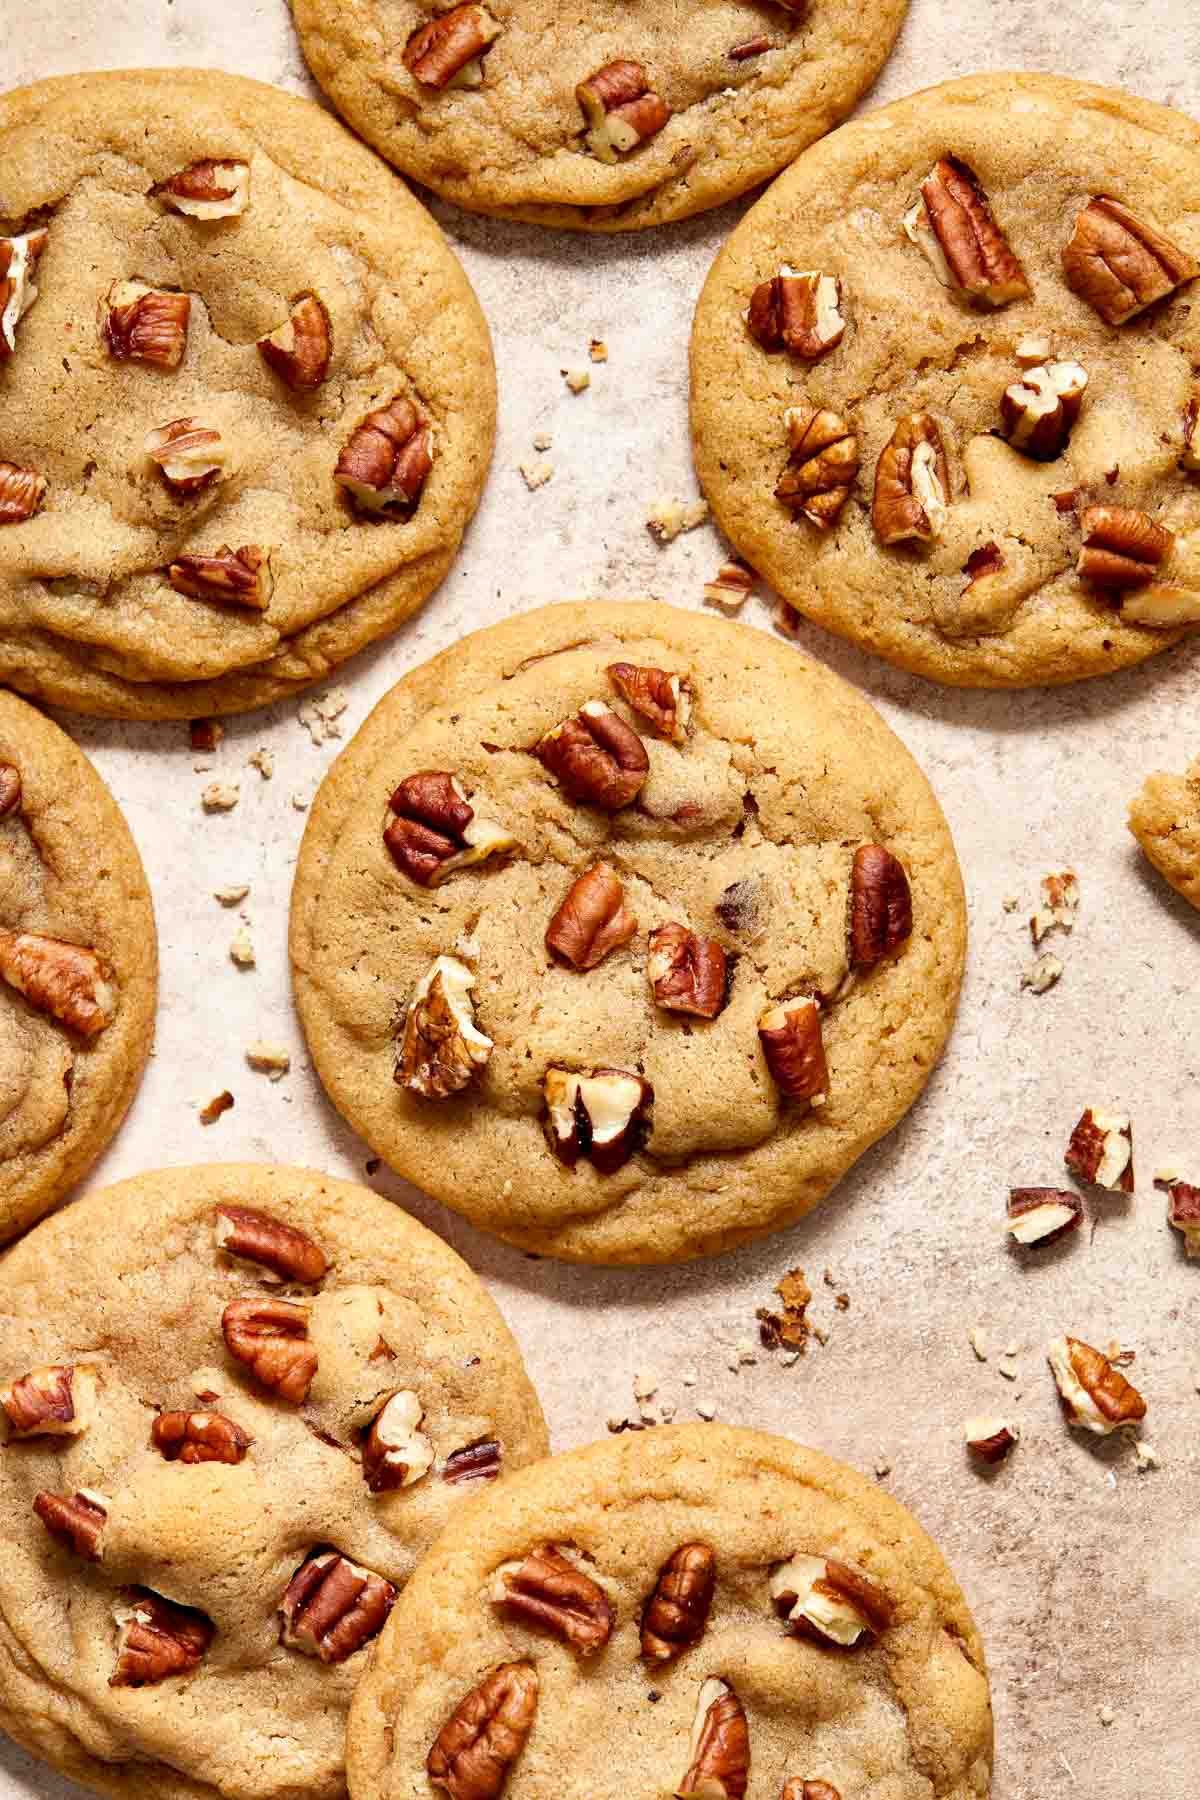 Butter Pecan Cookies are soft and chewy, have perfect golden crisp edges and loaded with crunchy toasted pecans. Quick and easy to make in under 20 minutes. | aheadofthyme.com